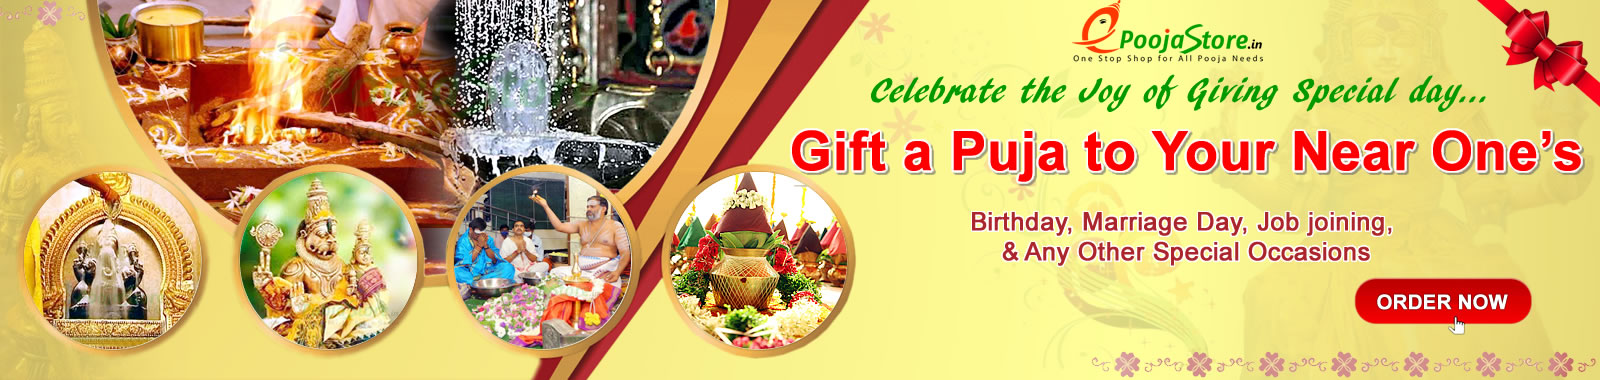 Gift a Puja to Your Near Ones